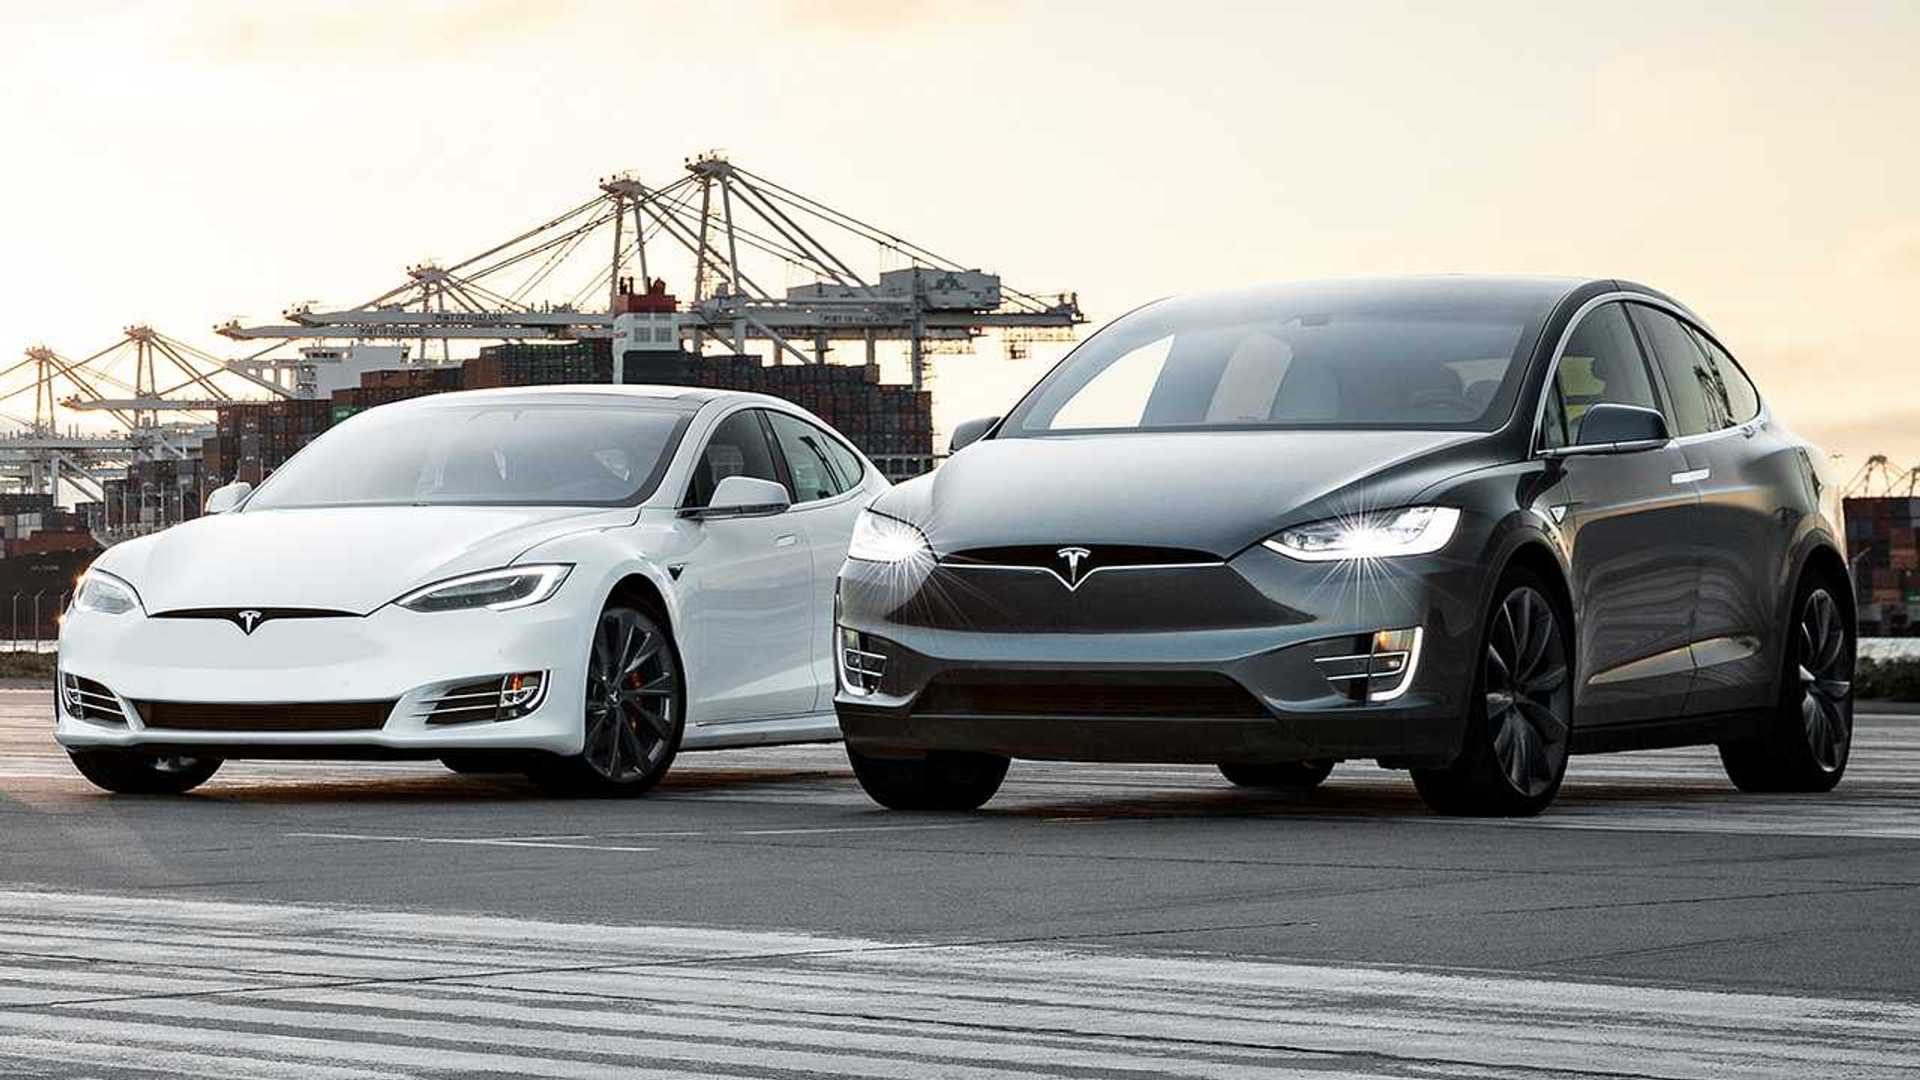 Tesla slashes prices on electric cars again - Model X drops by $10,000, Model S drops by $5,000